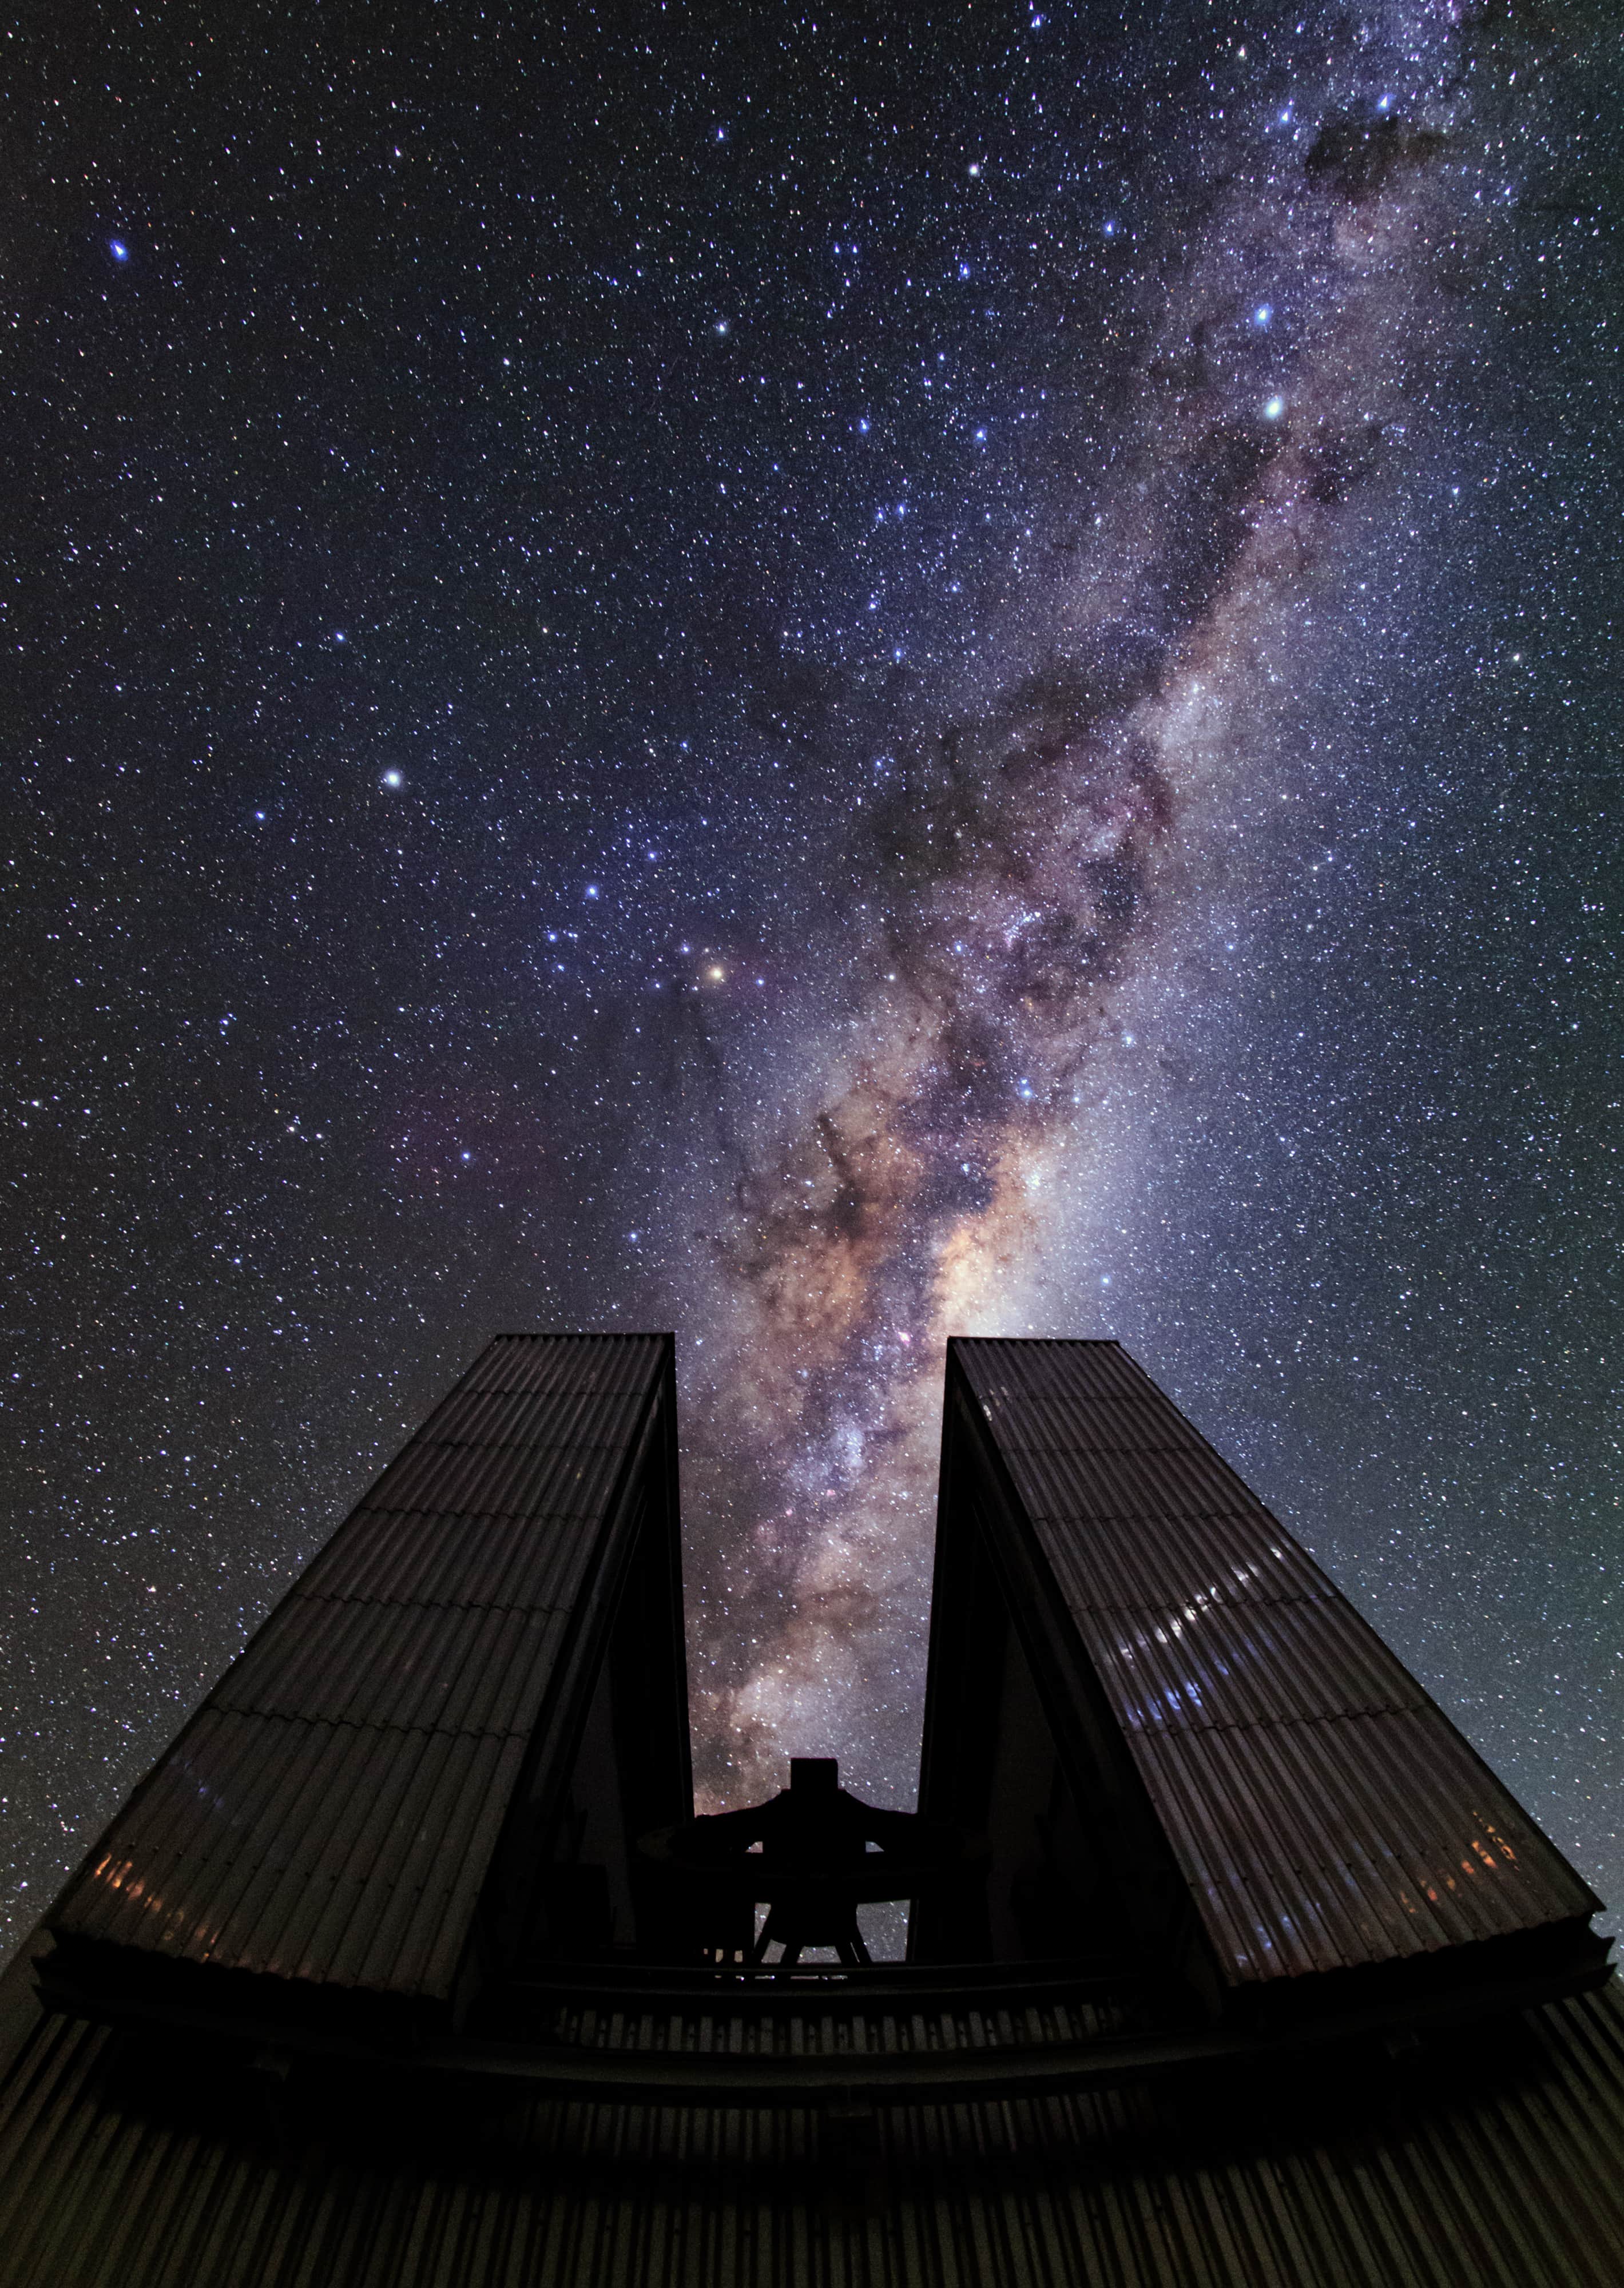 A curtain of stars surrounds the 3.58-metre New Technology Telescope (NTT) in this new Ultra High Definition photograph from the ESO Ultra HD Expedition [1]. It was captured on the first night of shooting at ESO's La Silla Observatory, which sits at 2400 metres above sea level on the outskirts of the Chilean Atacama Desert. The majestic telescope enclosure aligns perfectly with the Milky Way’s central region — the brightest section and the area which obscures the galactic centre. The distinctive octagonal enclosure that houses the NTT stands tall in this image — silhouetted against the glittering cosmos above and almost appearing to consume the Milky Way. This telescope housing was considered a technological breakthrough when completed in 1989. Visible to the left of the Milky Way is the bright orange star Antares at the heart of Scorpius (The Scorpion). Saturn can be seen as the brightest point to the upper left of Antares and Alpha and Beta Centauri glow in the upper right of the image. The Southern Cross (Crux) and the Coalsack dark nebula are also visible looming above Alpha and Beta Centauri. La Silla was ESO’s first observatory, inaugurated in 1969. The NTT pictured above was the first telescope in the world to have a computer-controlled main mirror and broke new ground for telescope engineering and design paving the way for ESO's Very Large Telescope. Notes [1] The team is made up of ESO's videographer Herbert Zodet, and three ESO Photo Ambassadors: Yuri Beletsky, Christoph Malin and Babak Tafreshi. Information on the expedition's technology partners can be found here, and their blog here.